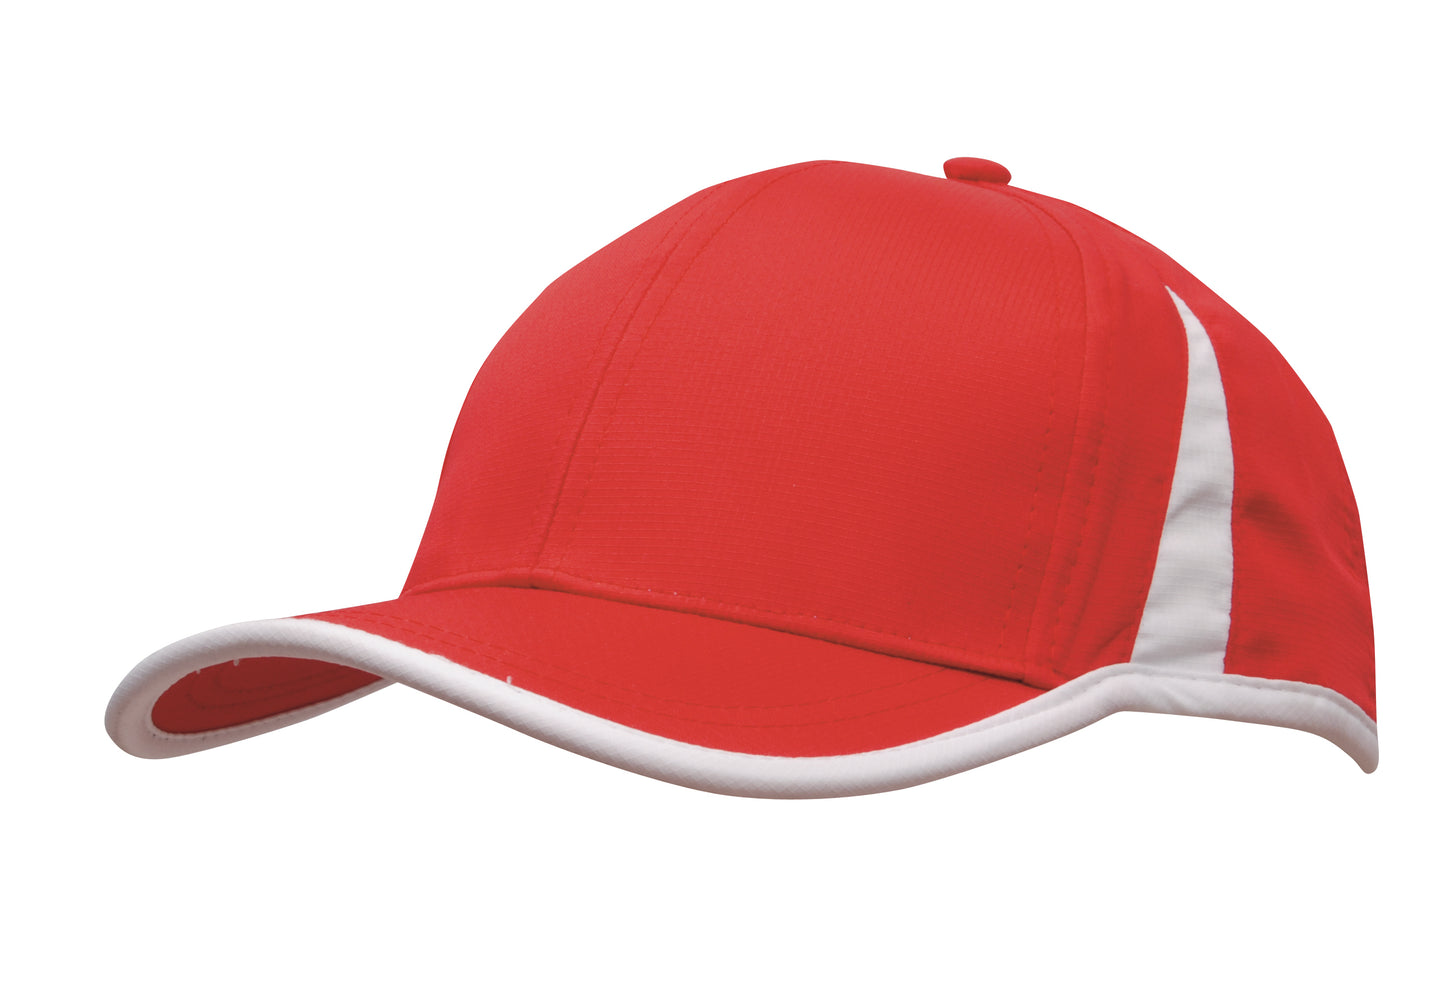 Headwear Sports Ripstop with Inserts and Trim